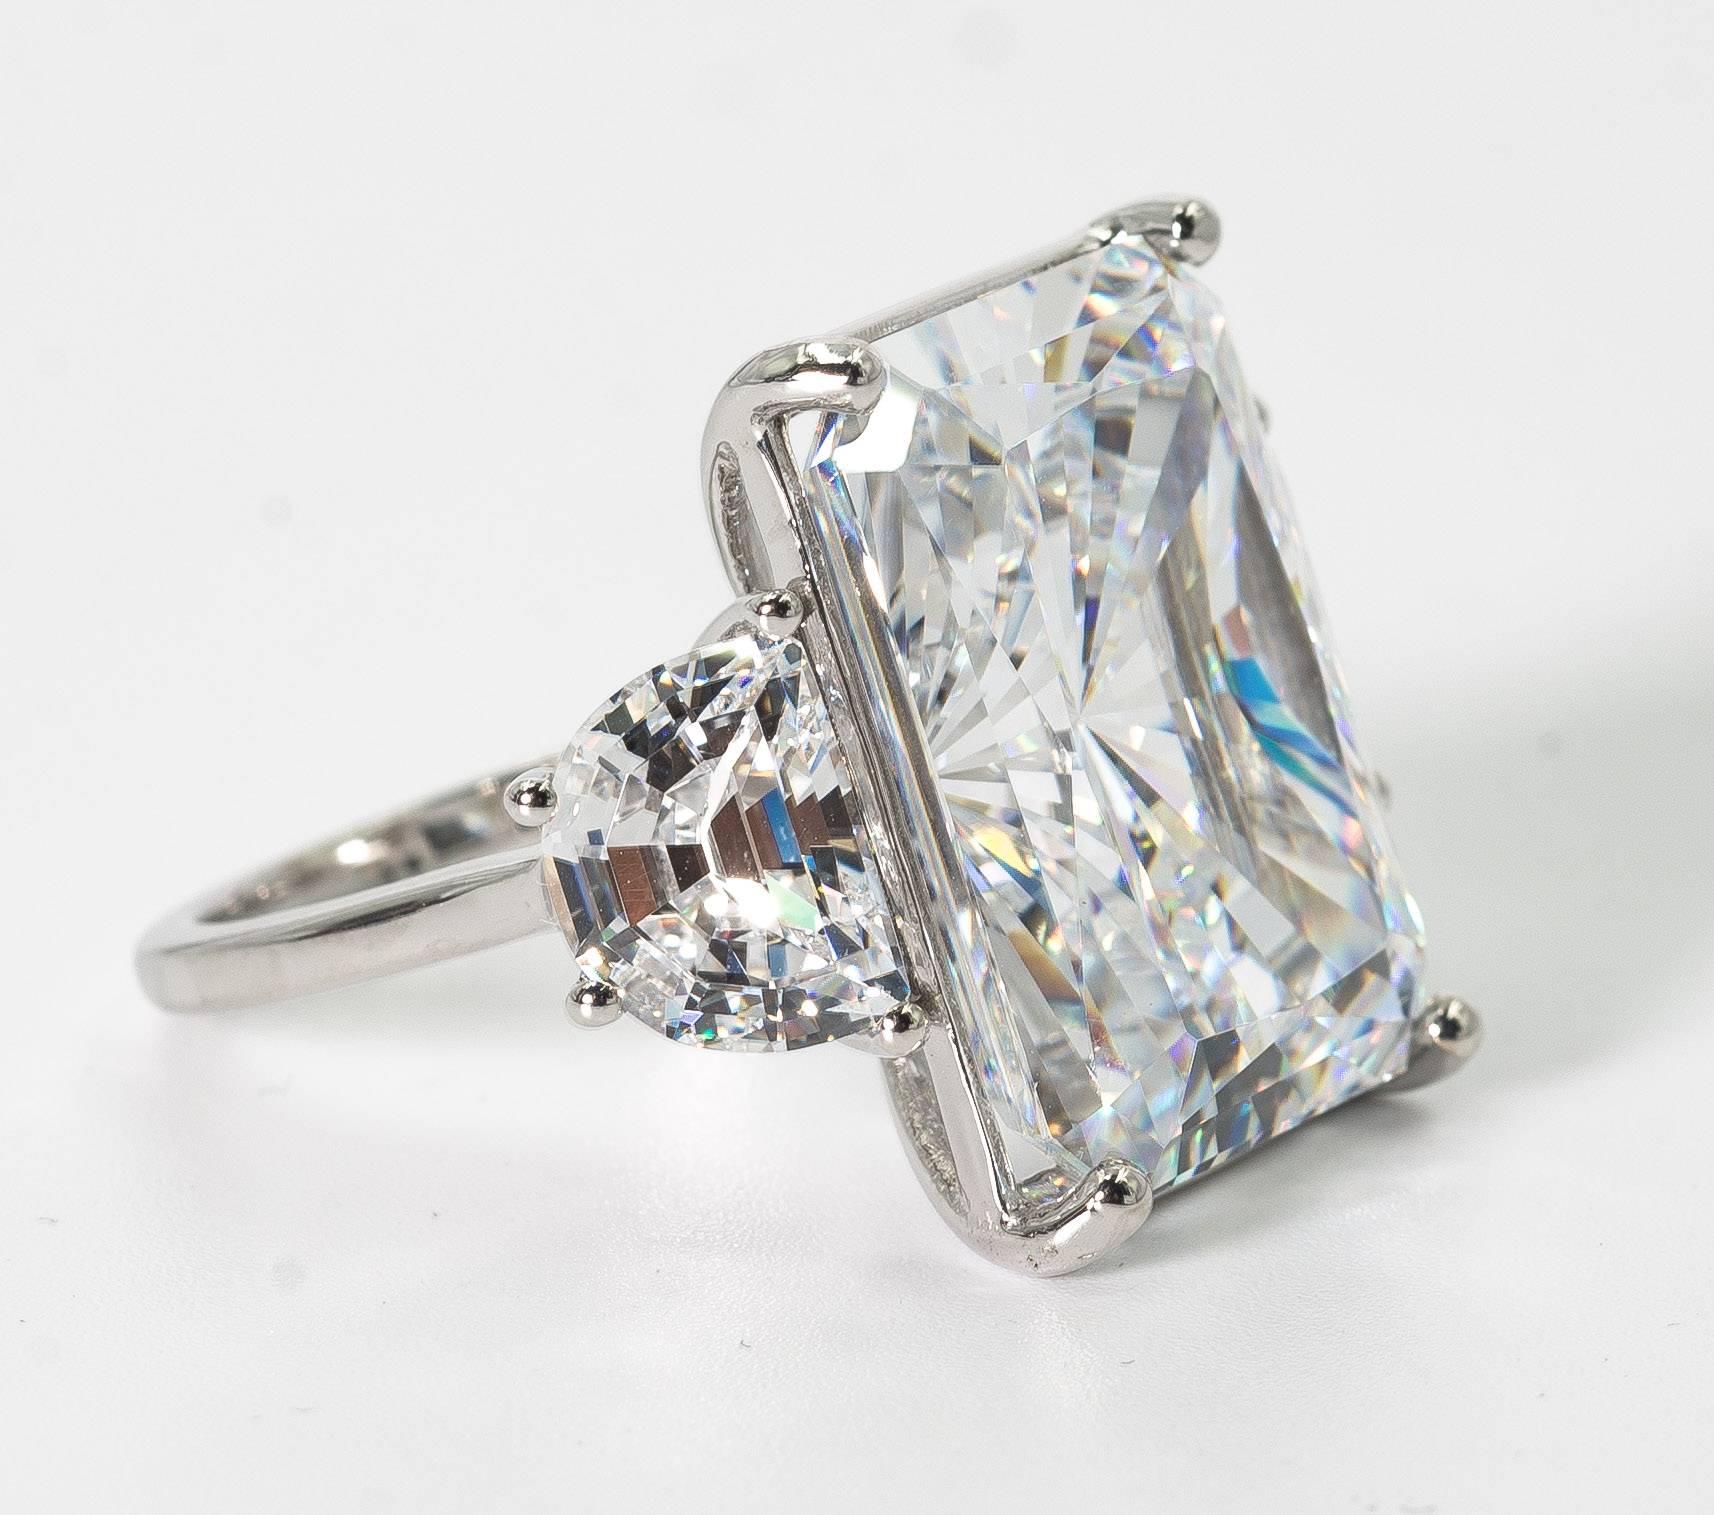 Magnificent faux white 25 carat Radiant Cut diamond ring set with classic half moons side stones. The radiant cut cubic zircon is a wonderful high quality white color that reflects and sparkles exactly like a gem!
Measures 7/8th inch by 6/8th inch.